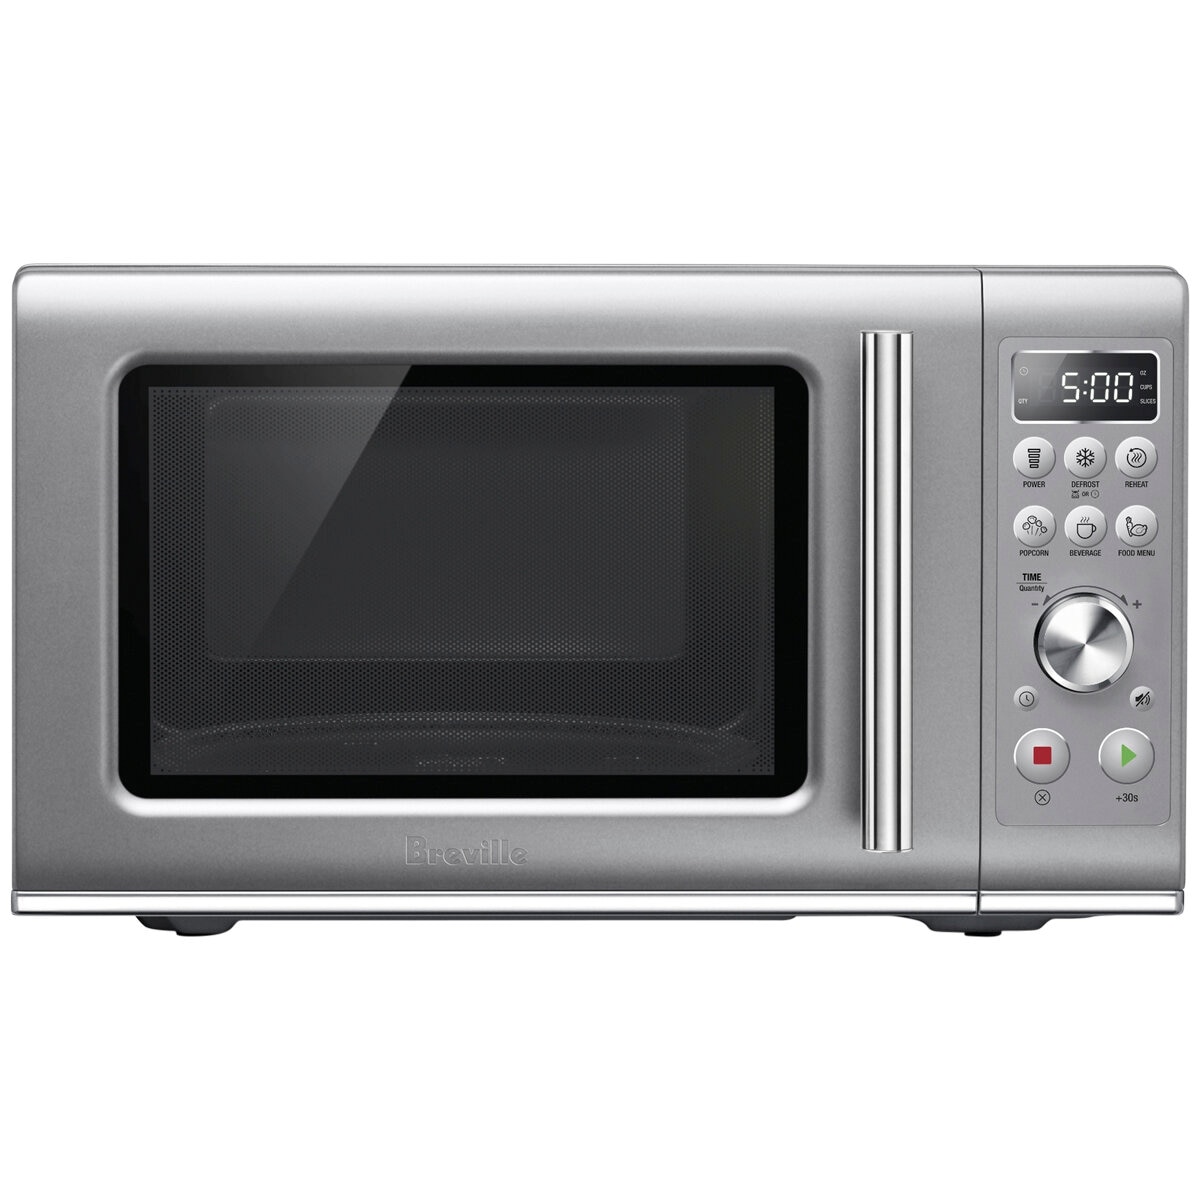 Breville The Compact Wave Soft Close Microwave